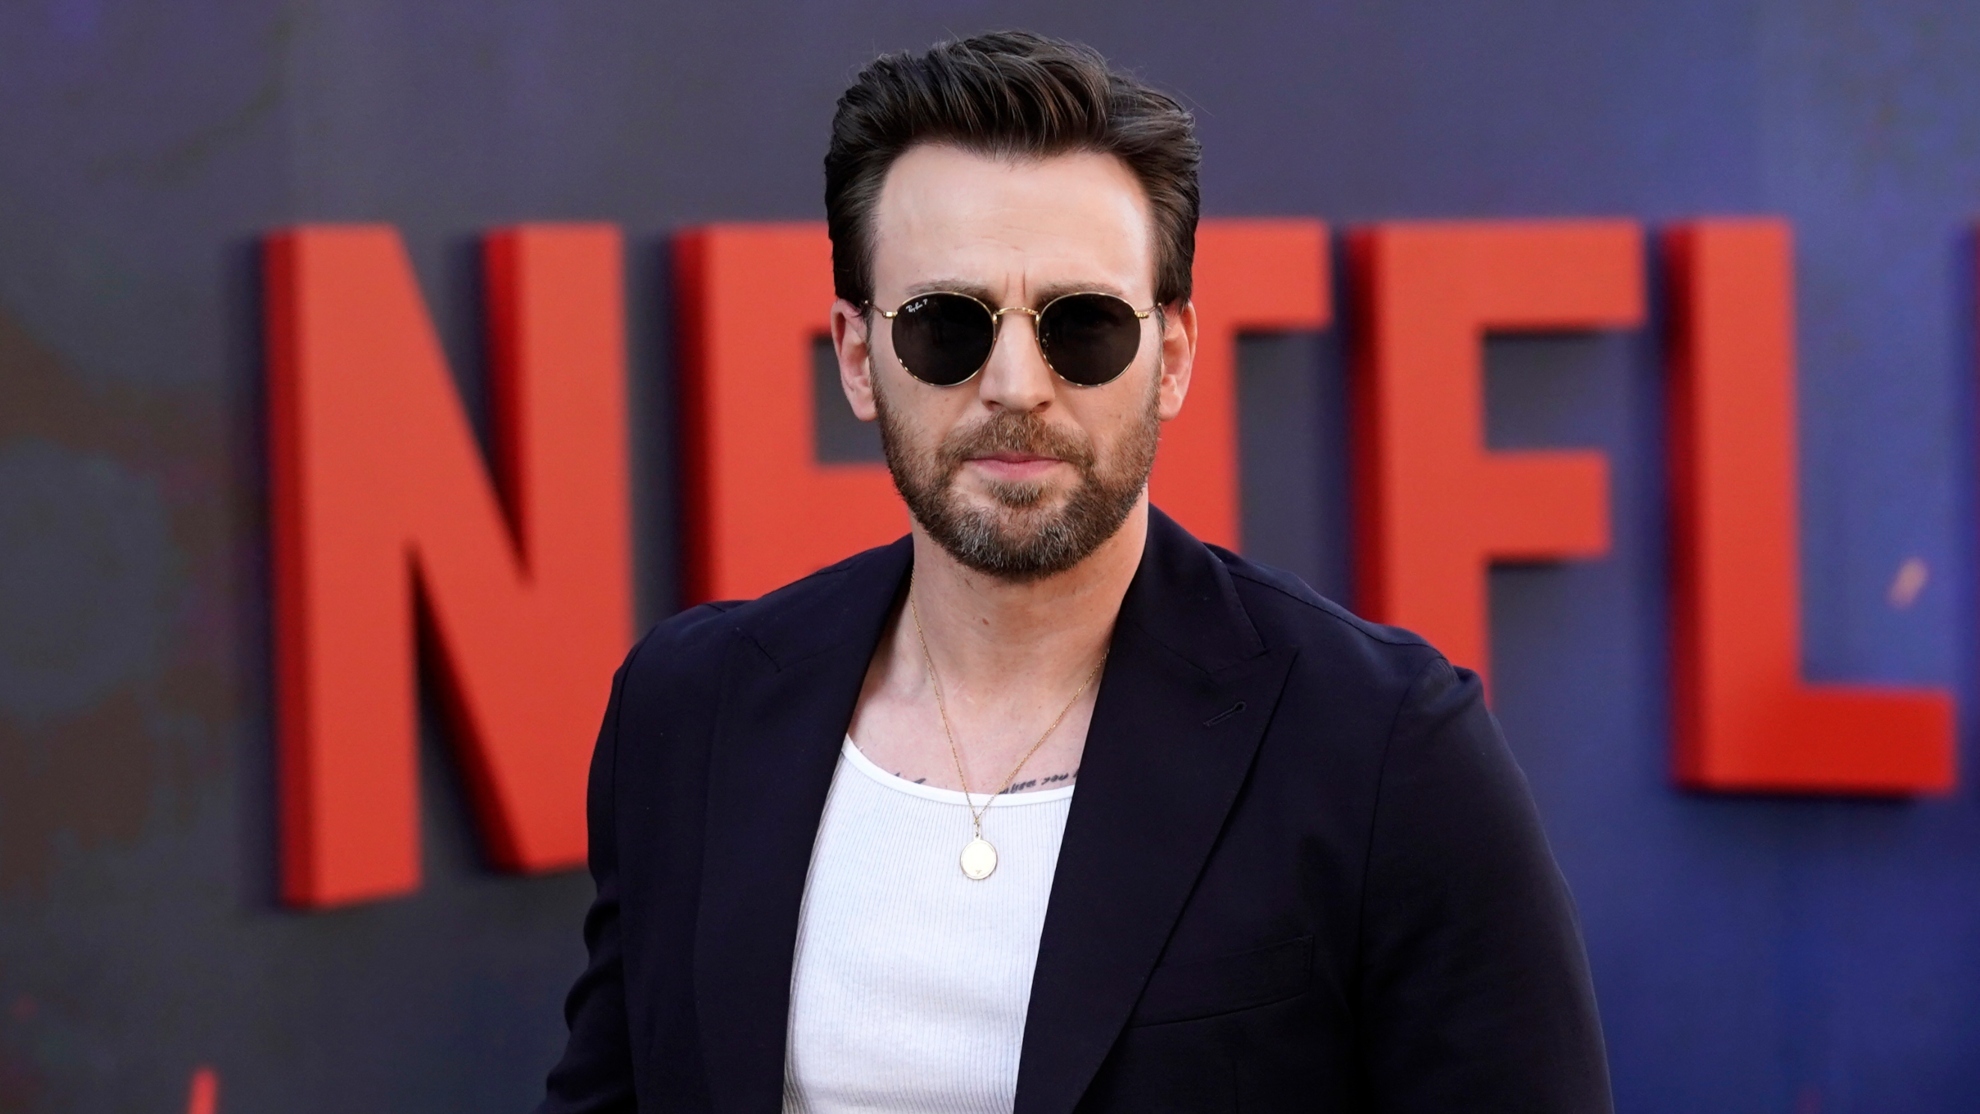 Chris Evans arrives at the premiere of the Netflix film The Gray Man